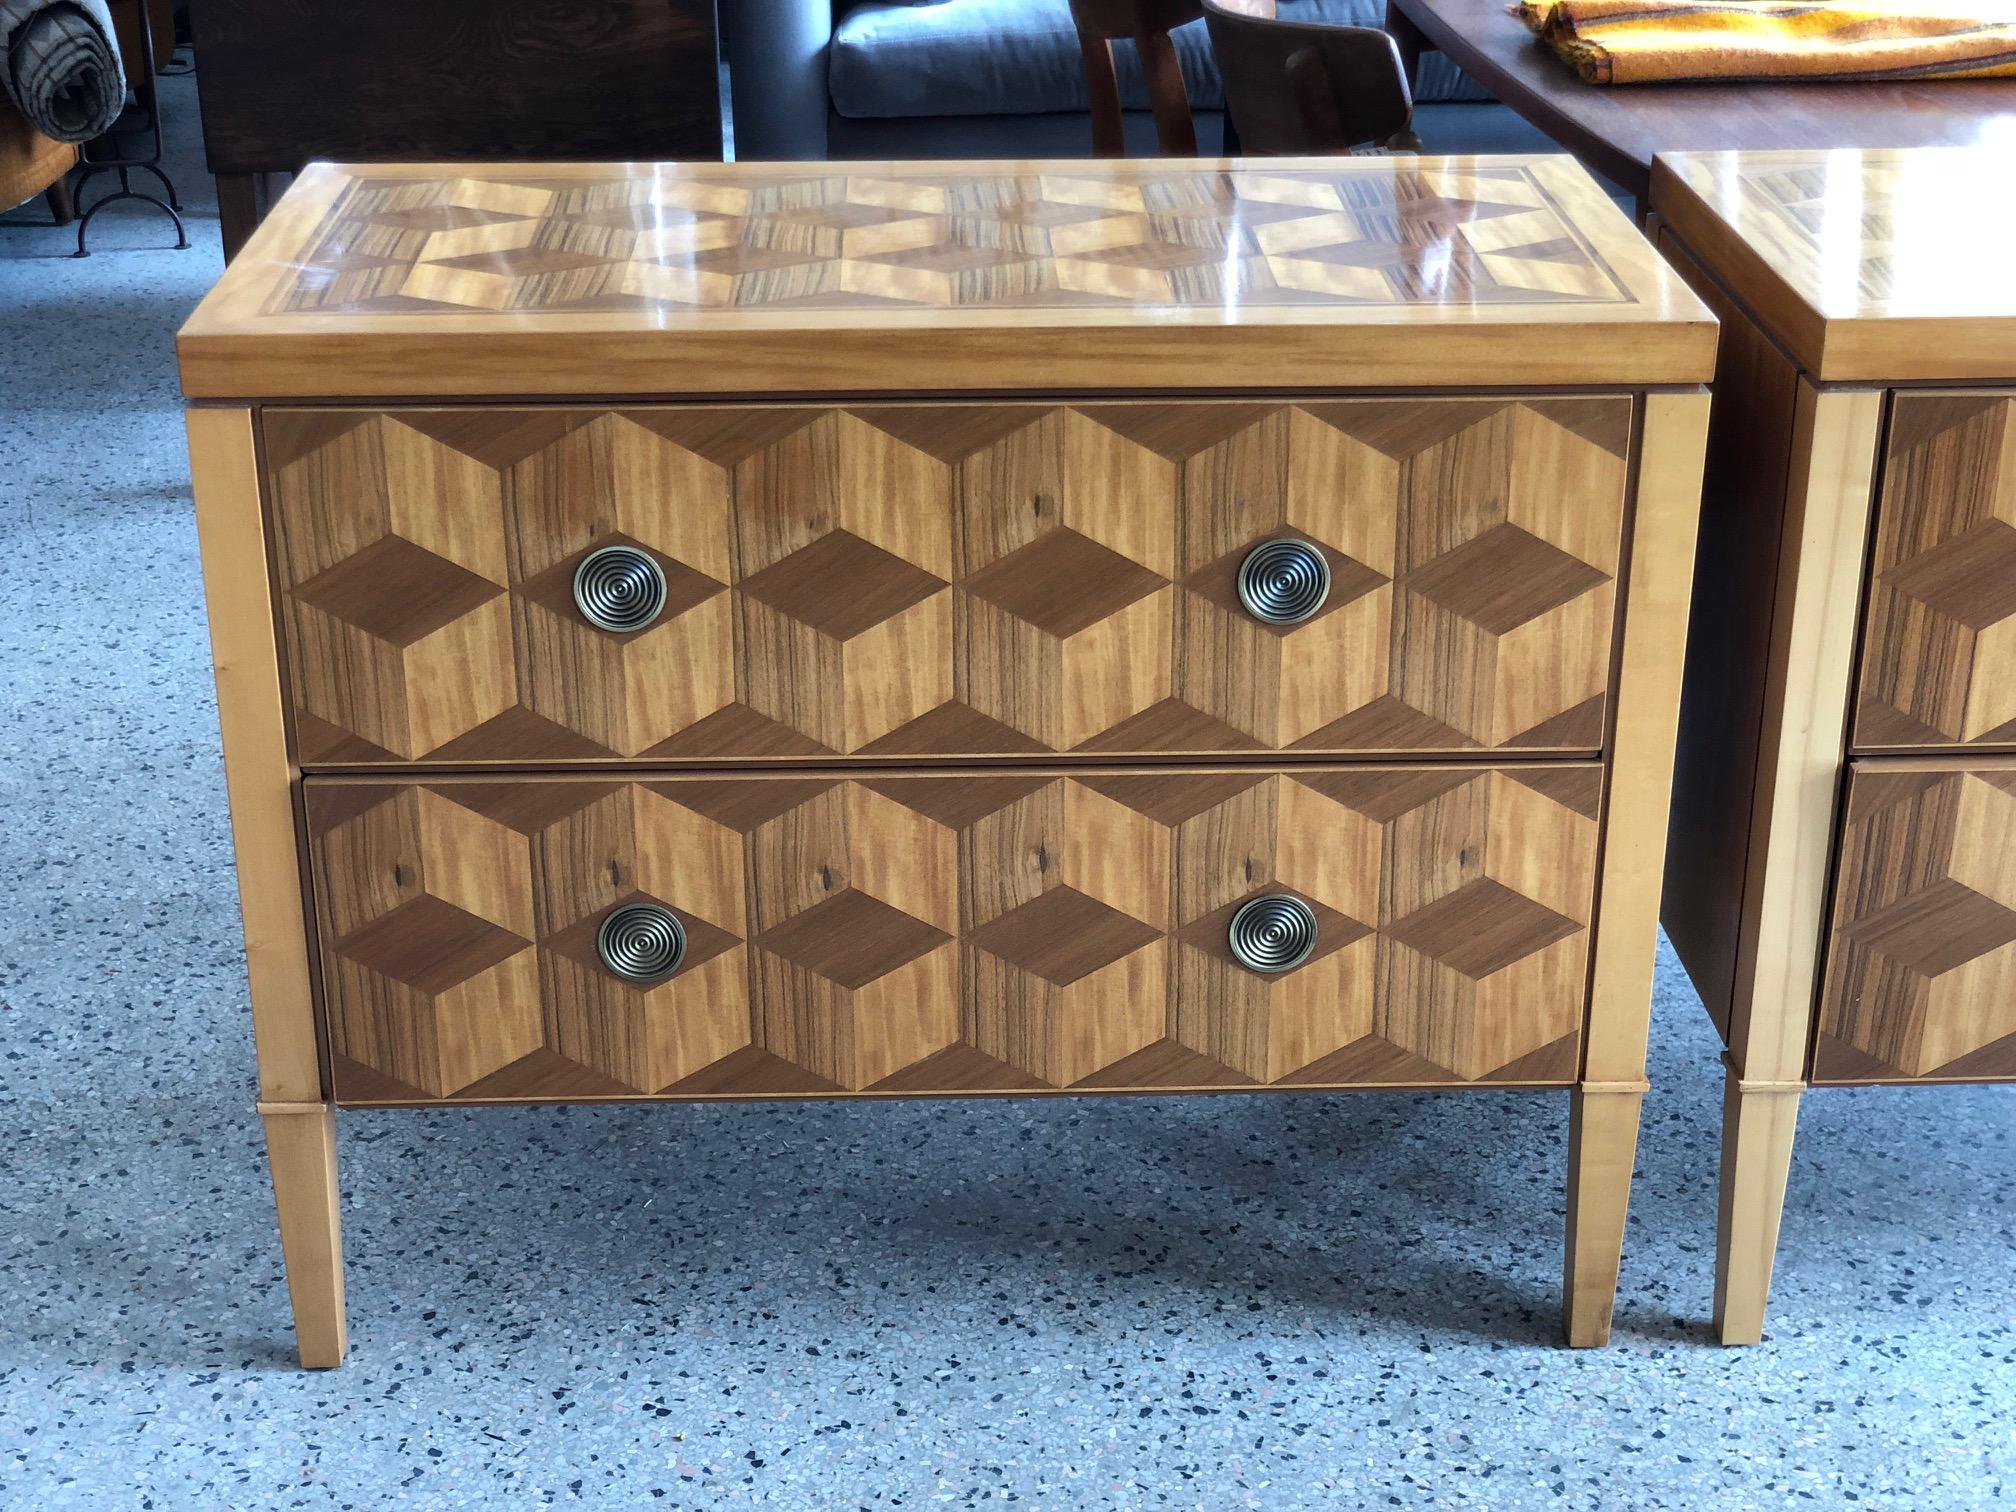 Late 20th Century Pair of Parquetry Chests by Baker with a Geometric Design